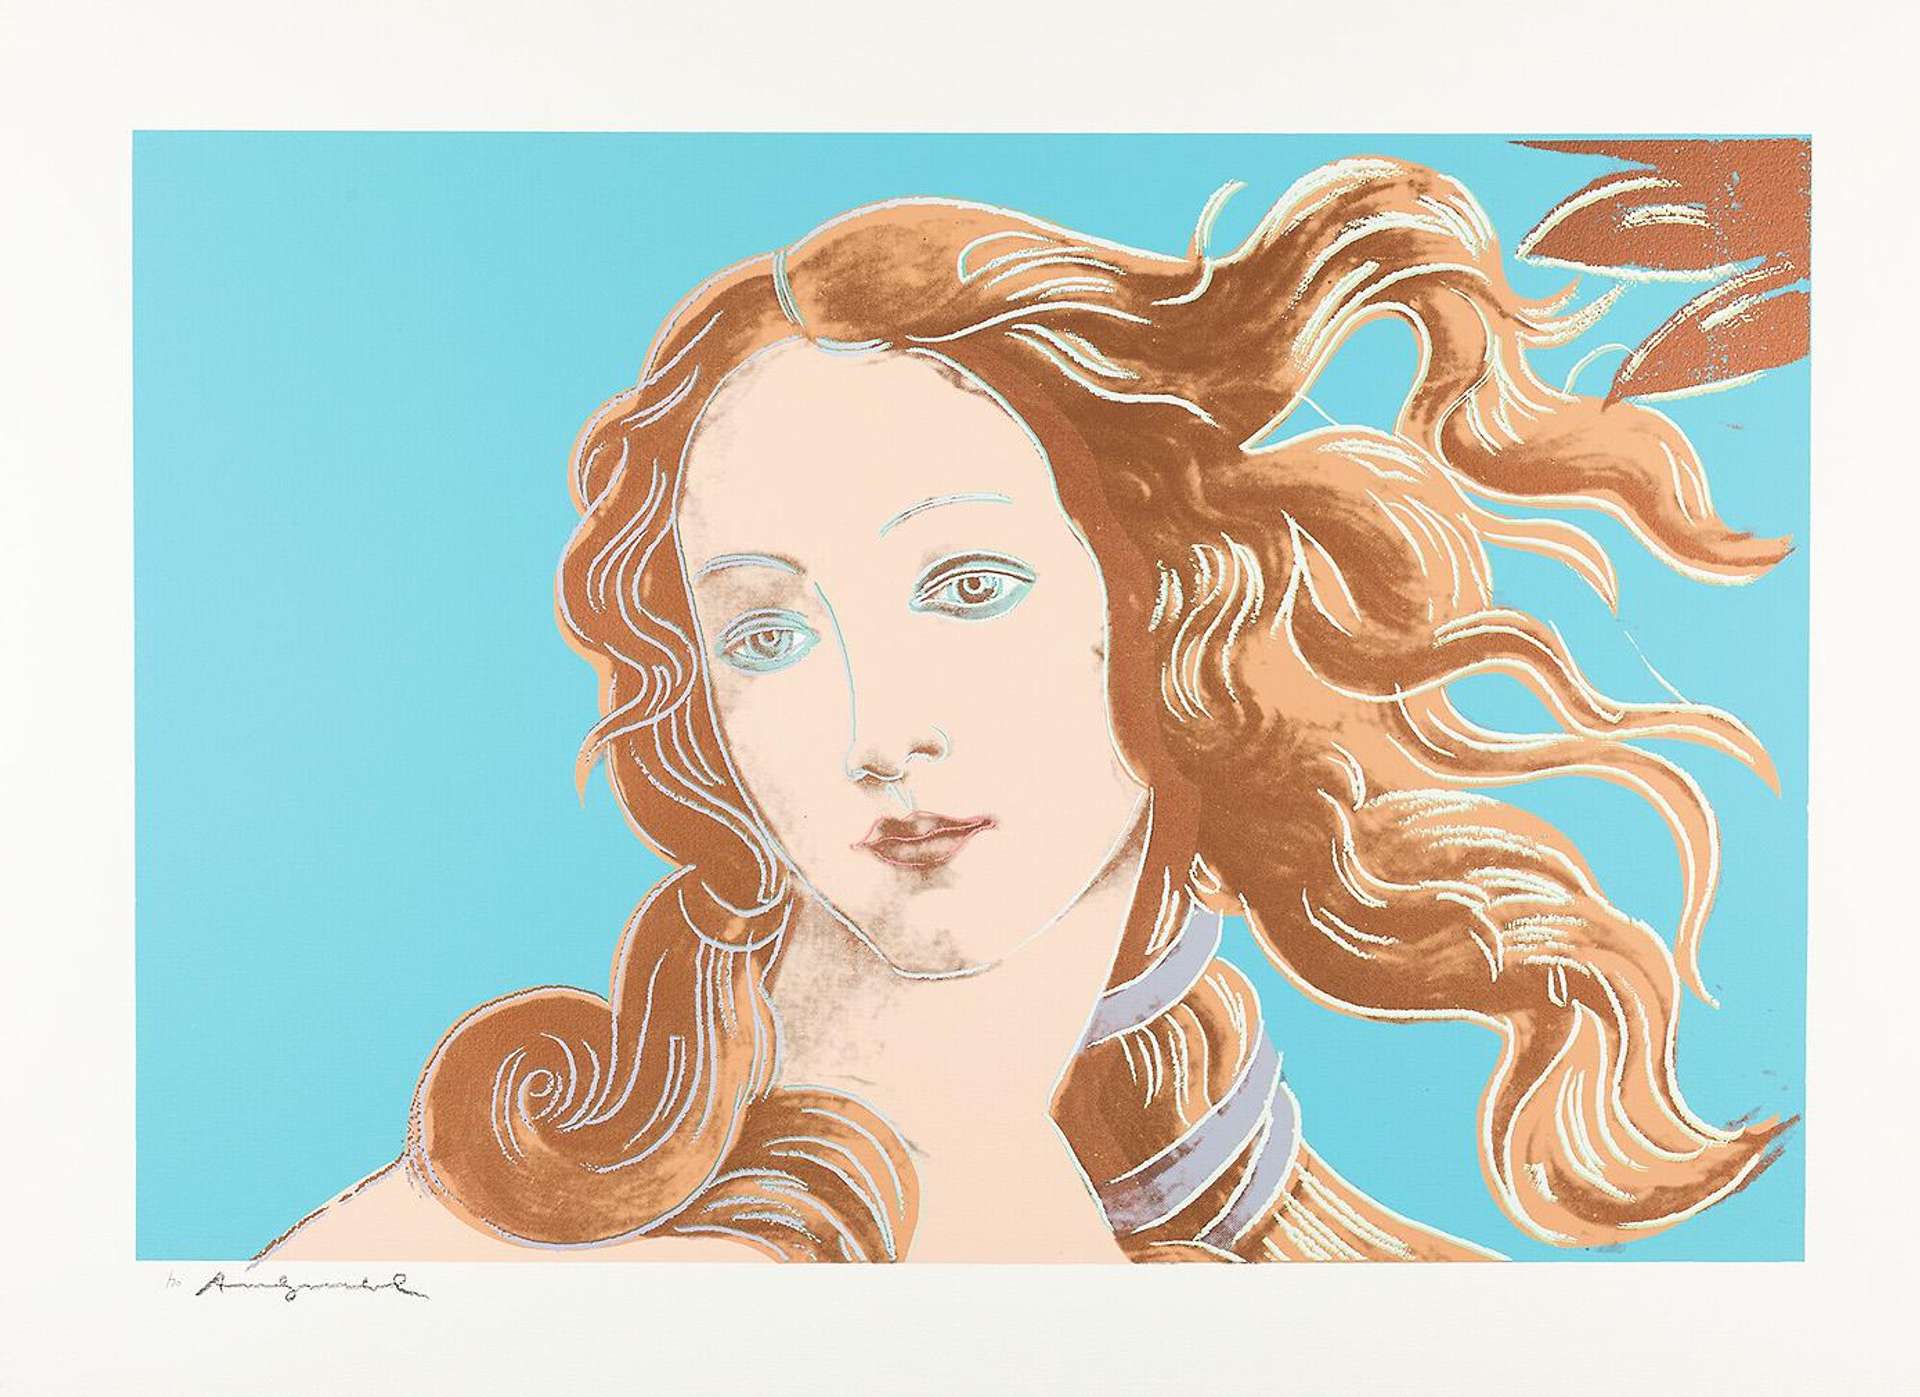 Andy Warhol’s print adapts Quattrocento artist Sandro Botticelli’s The Birth of Venus. He has cropped the scene, reducing the frame to her face, neck, and billowing hair. It is done in bright colours, including a turquoise blue background.